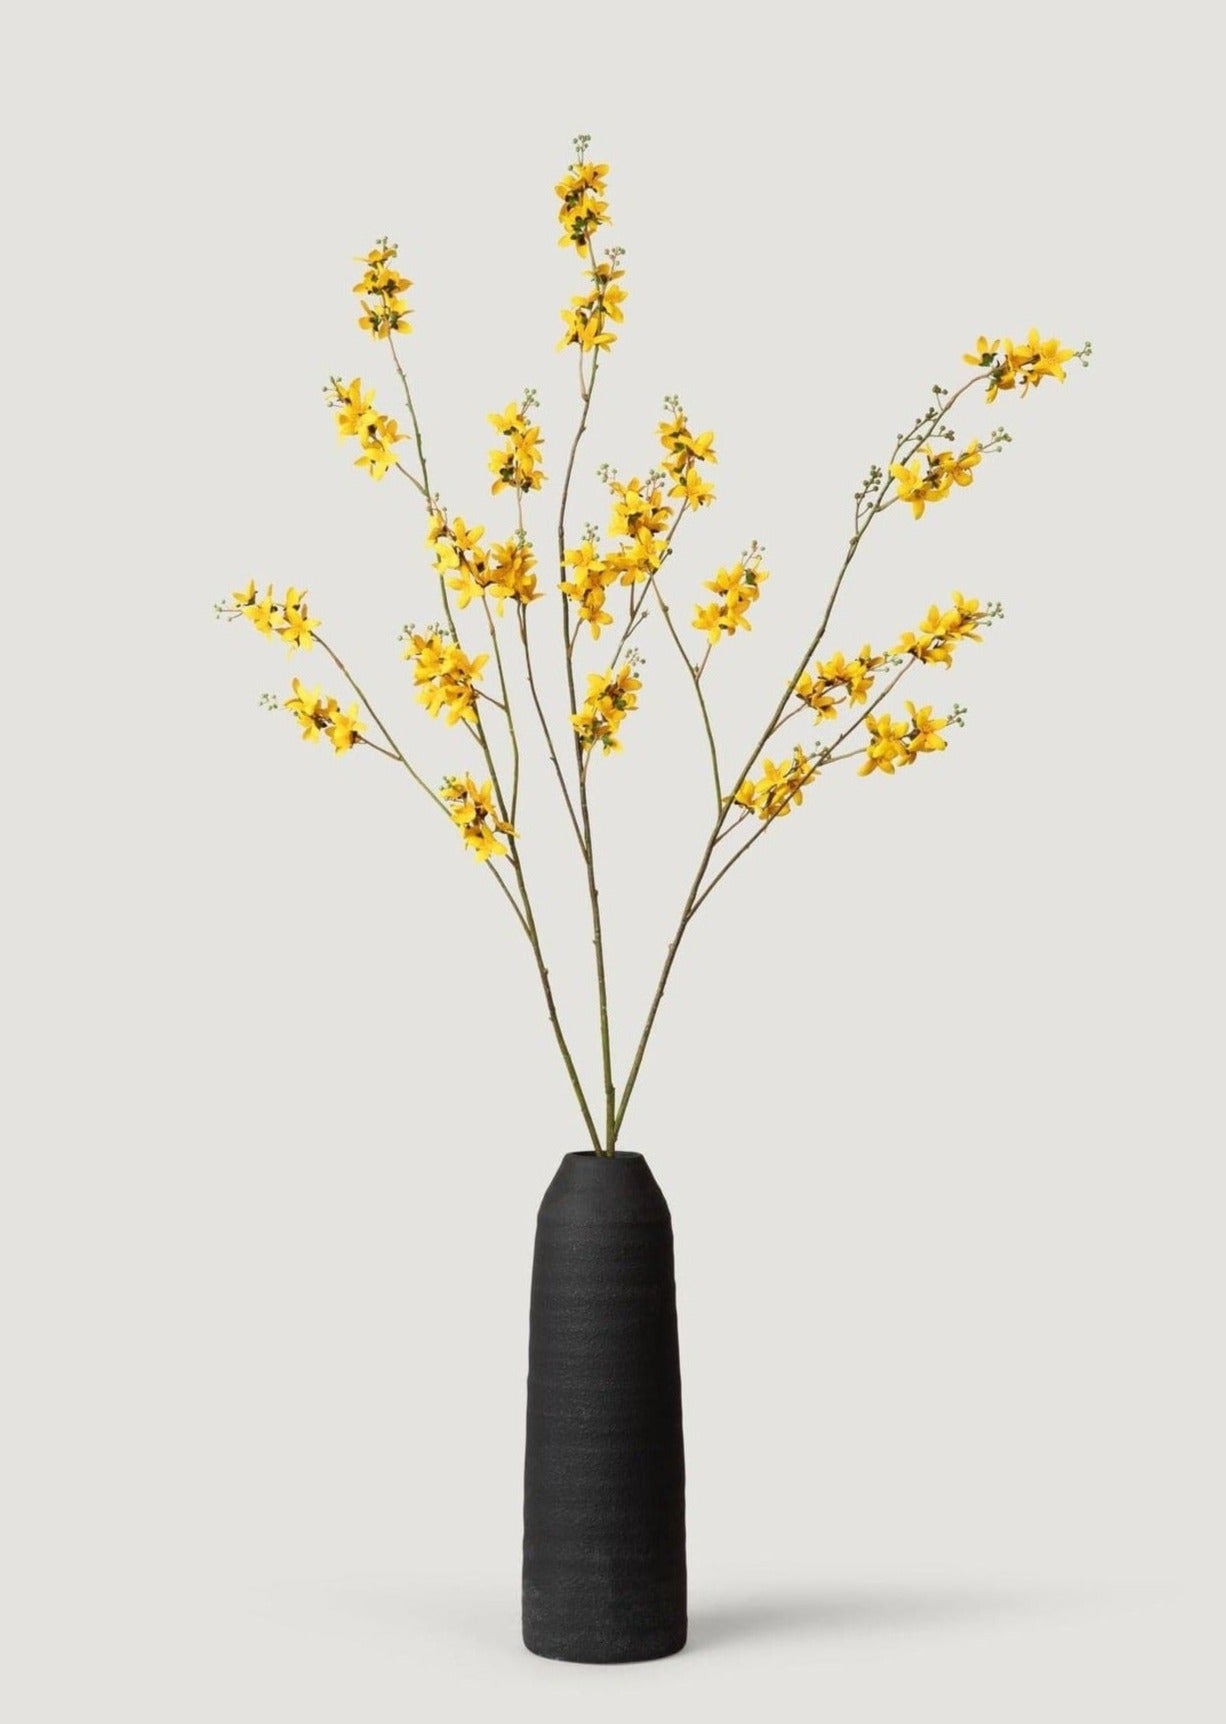 Tall Geena Ceramic Black Vase Styled with Faux Forsythia Branches at afloral